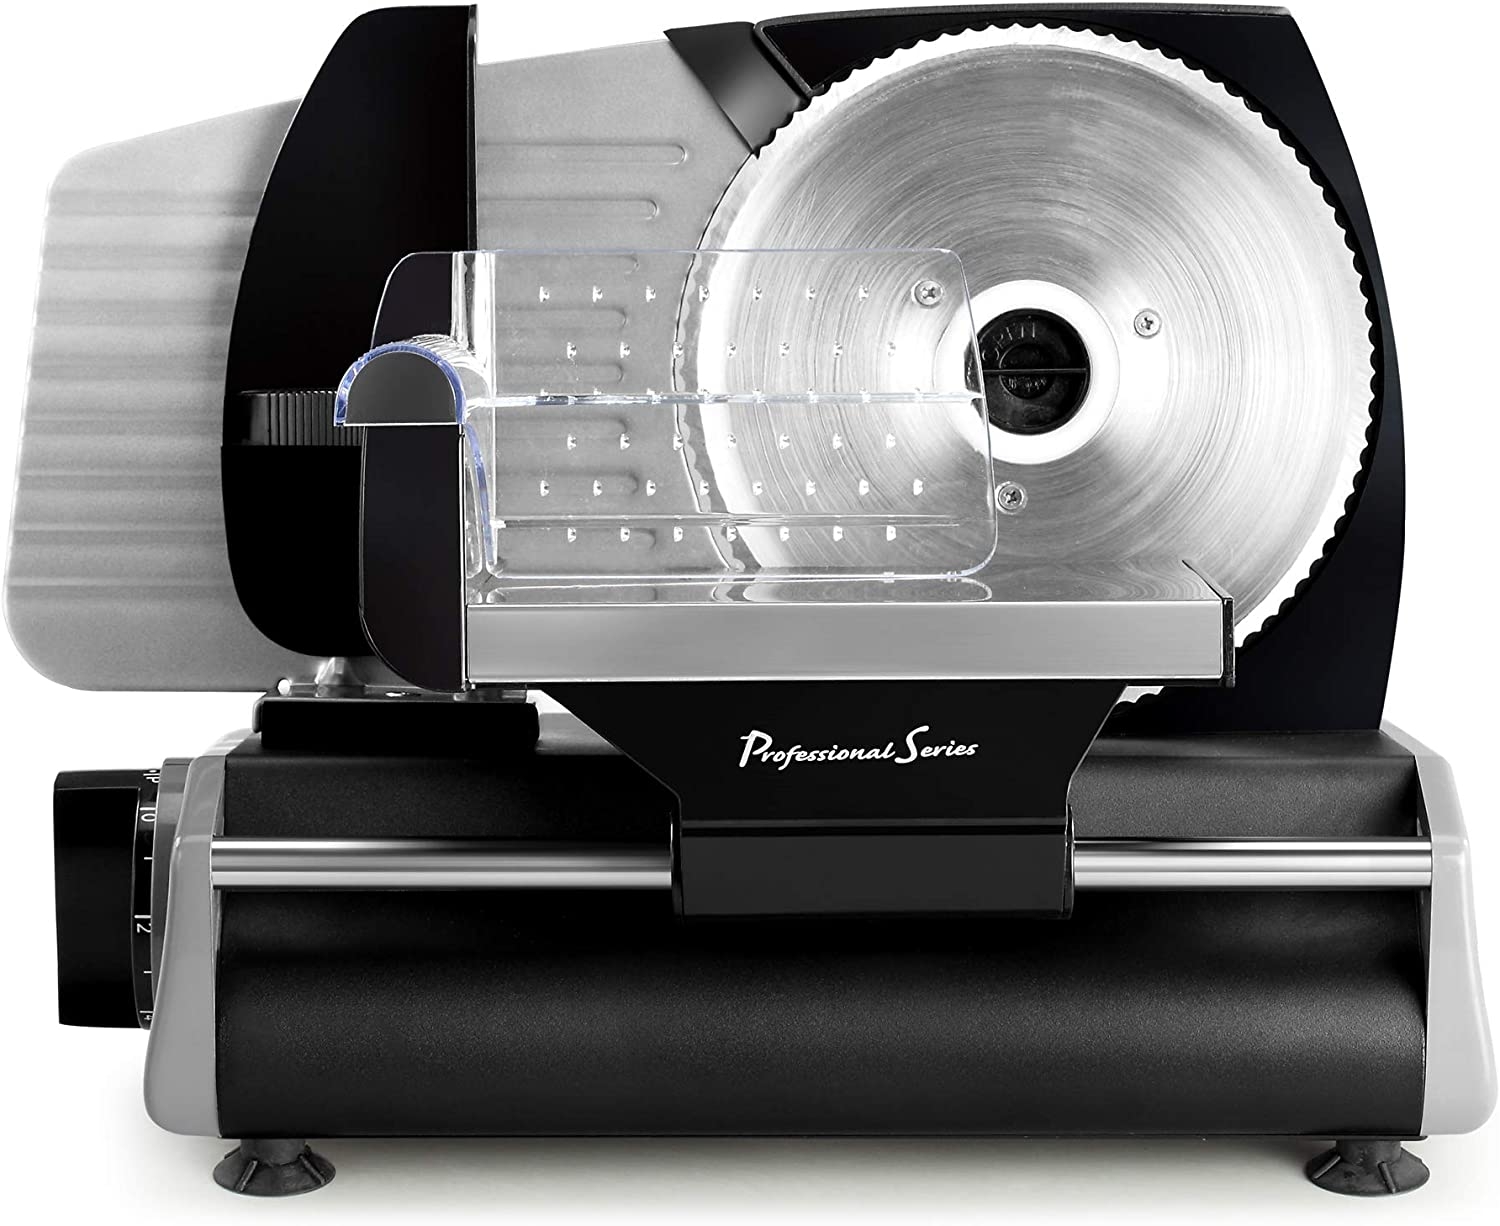 Professional Series Pro Series Meat Slicer, 7.5, Stainless Steel Import To Shop ×Product customization General Description